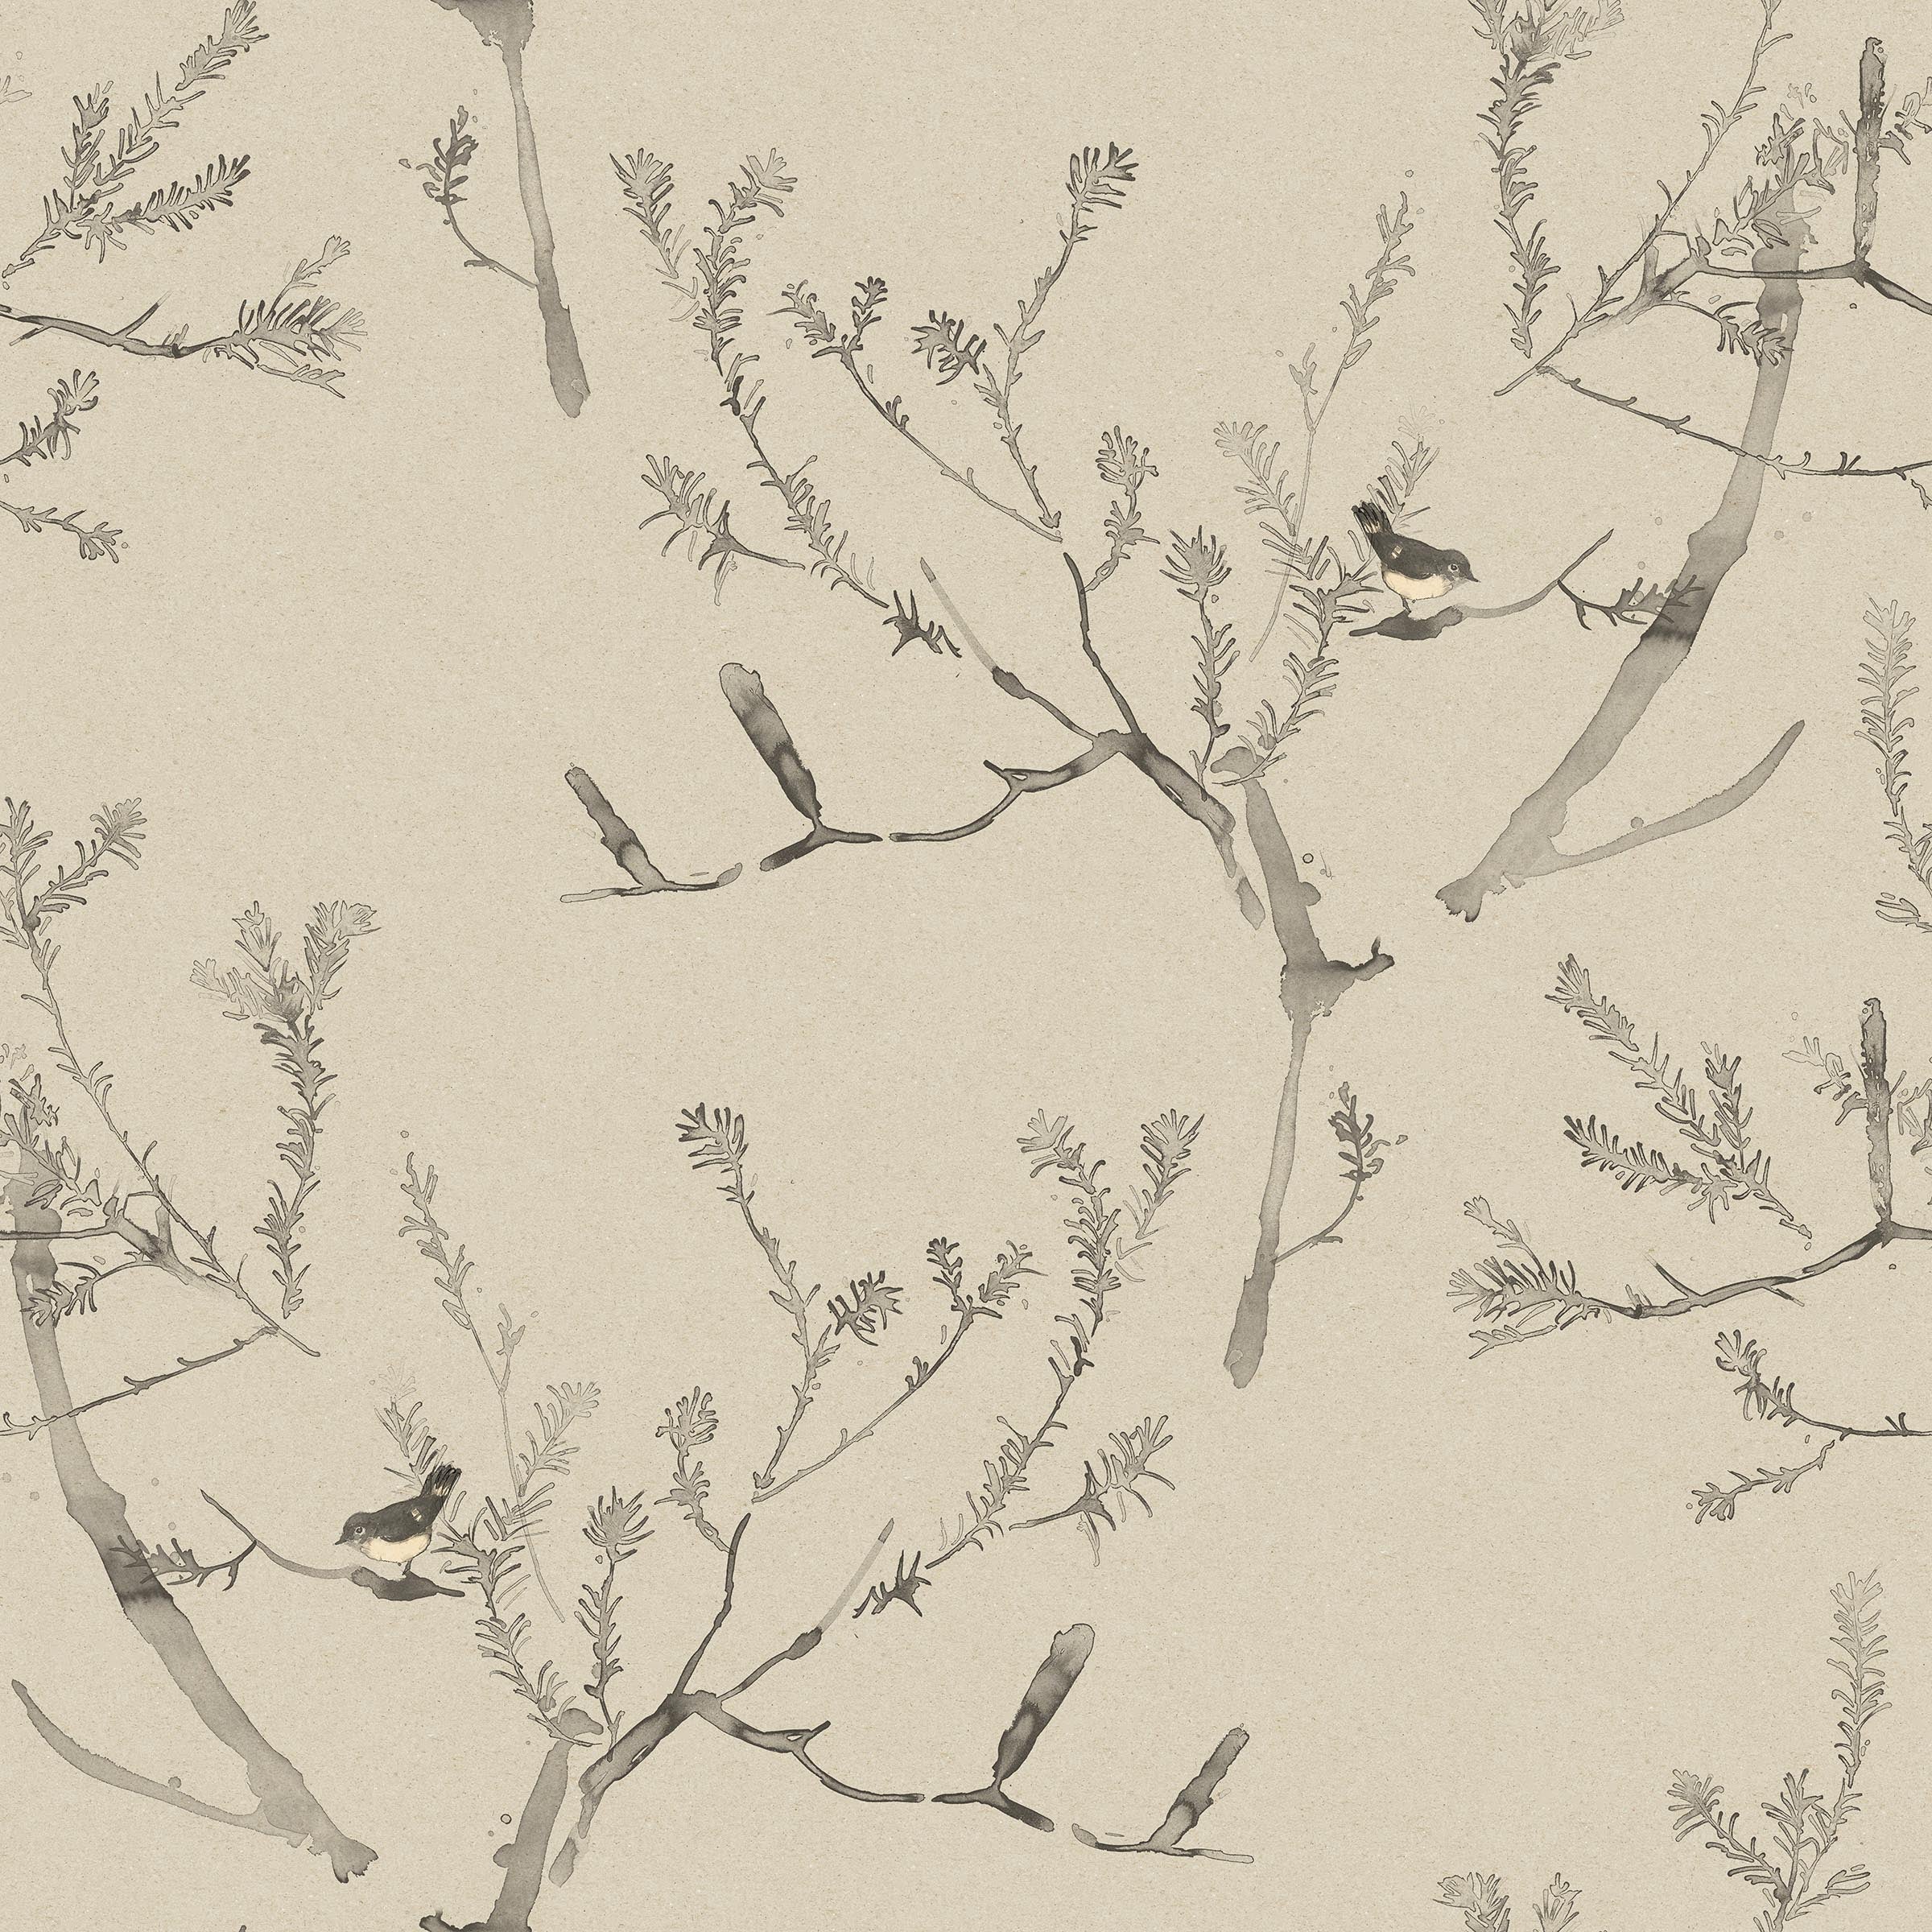 Detail of fabric in a painterly bird and branch pattern in shades of gray on a tan field.